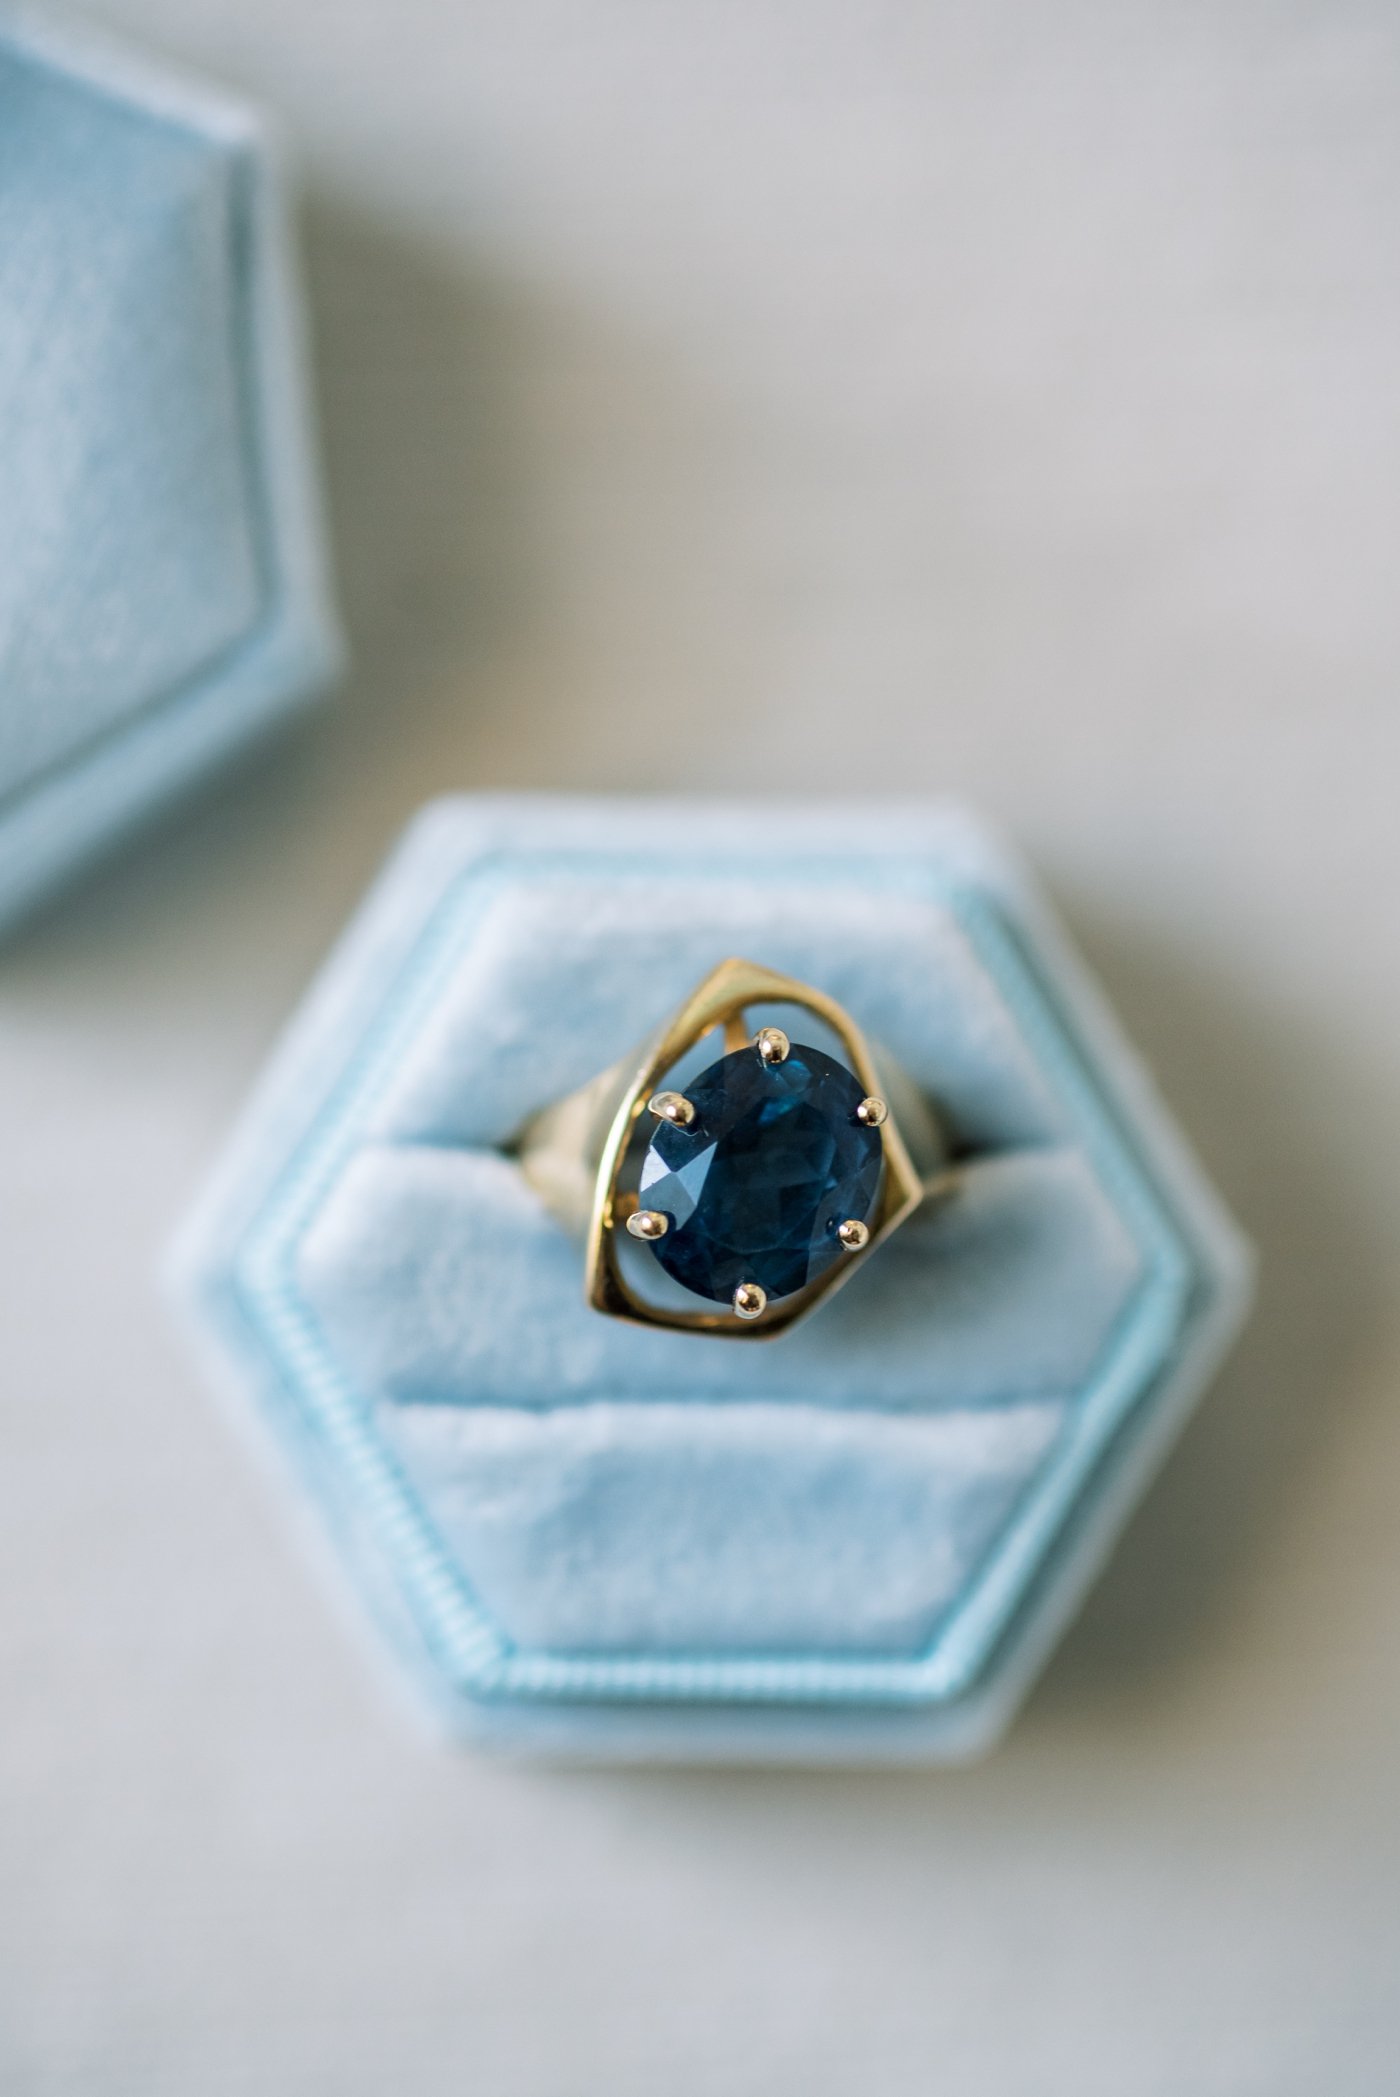 Blue topaz and yellow gold ring in a powder blue ring box